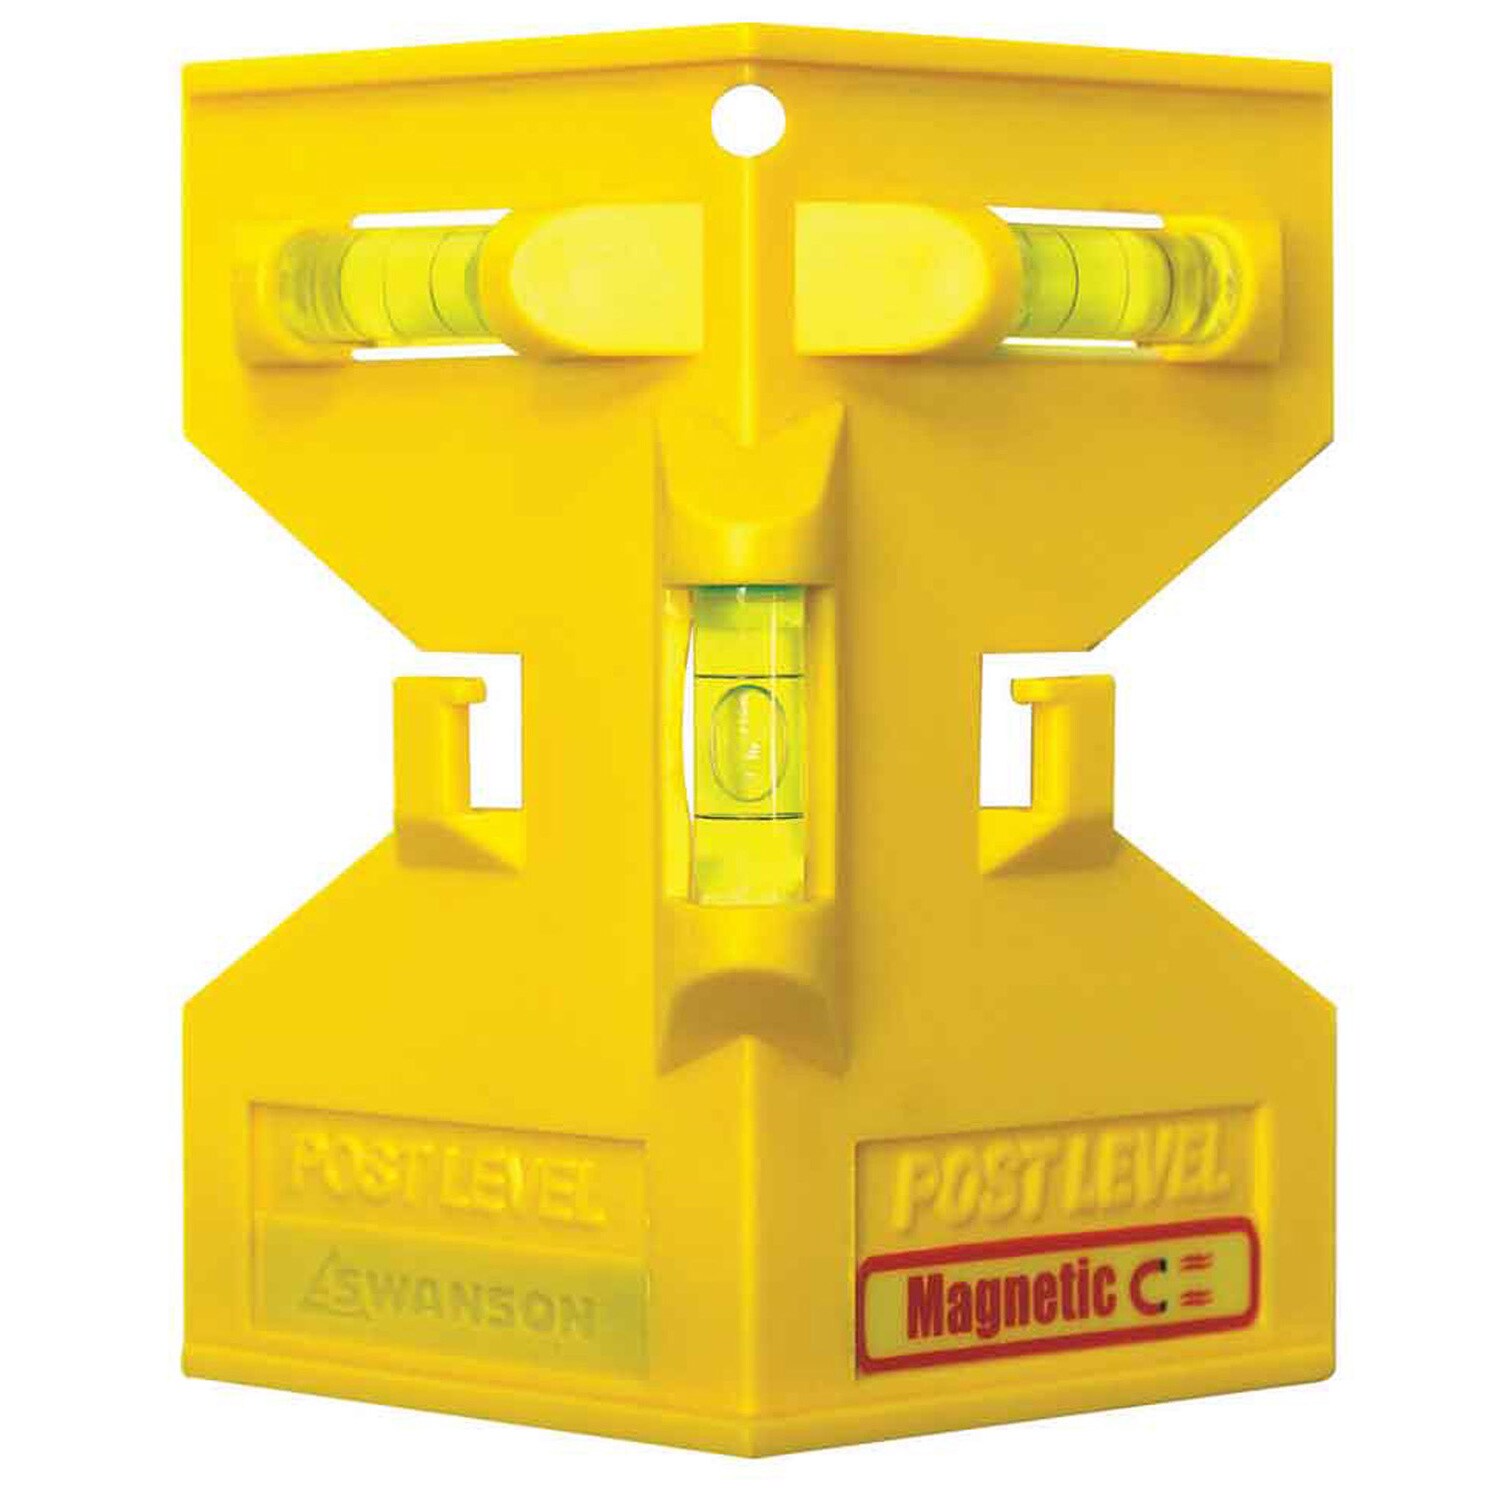 Trades Pro 25-Feet x 1-Inch Tape Measure, SAE and Metric, 837287